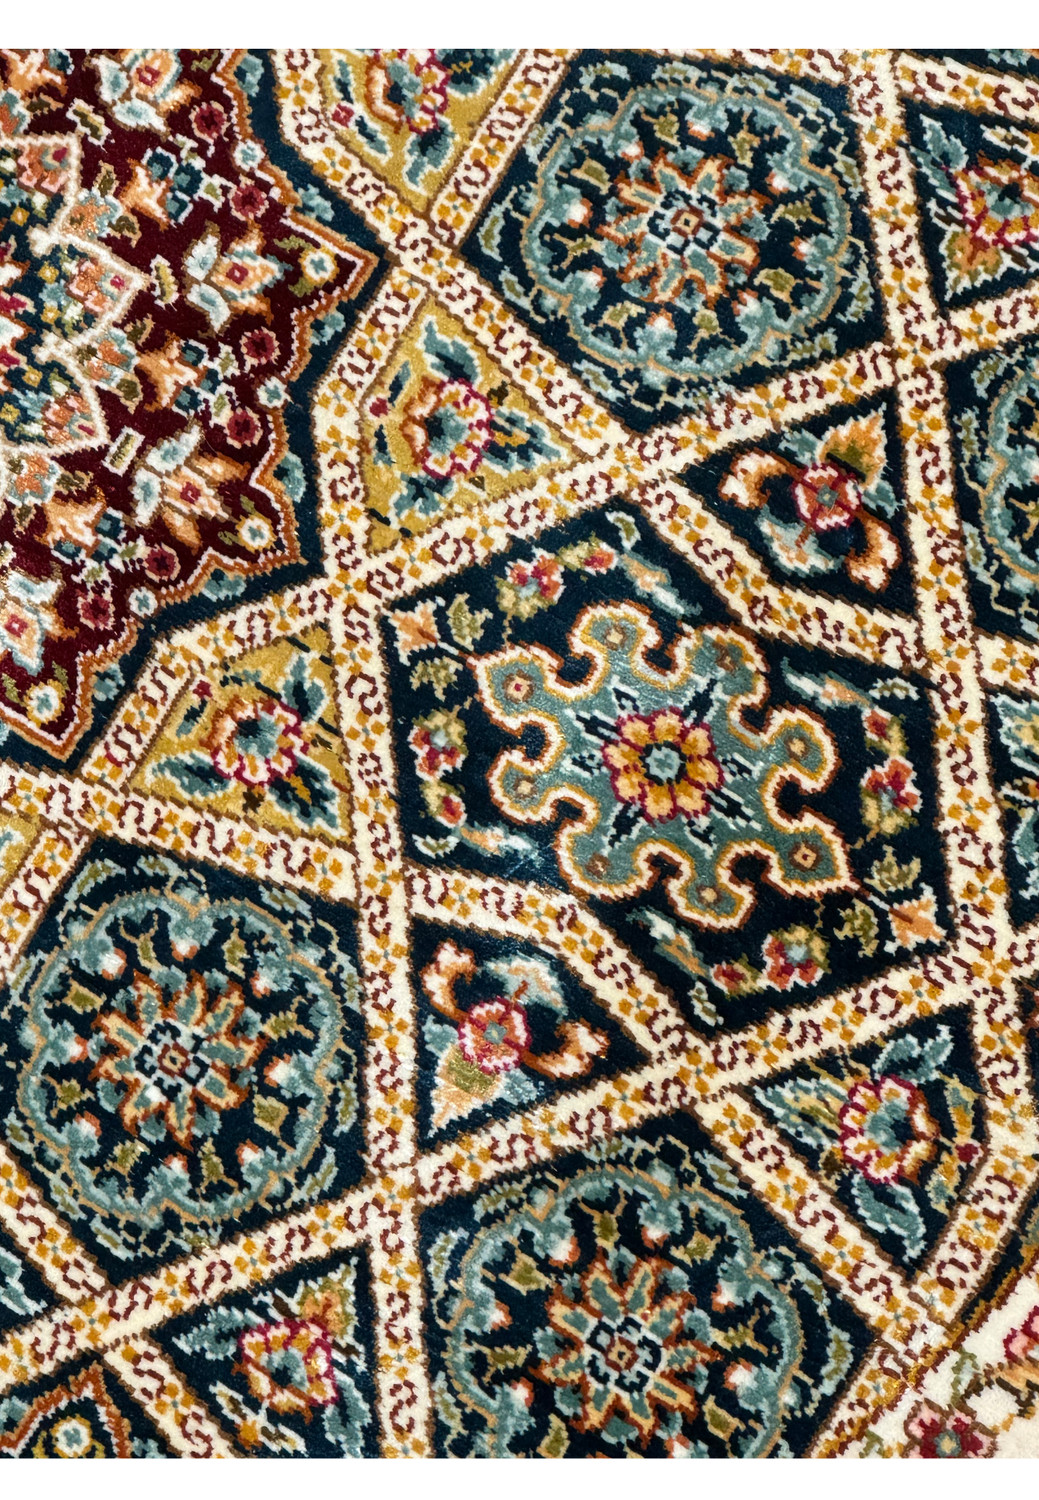 Detailed perspective of the Persian Qum silk rug patterns, with focus on the vibrant medallions and ornate florals.